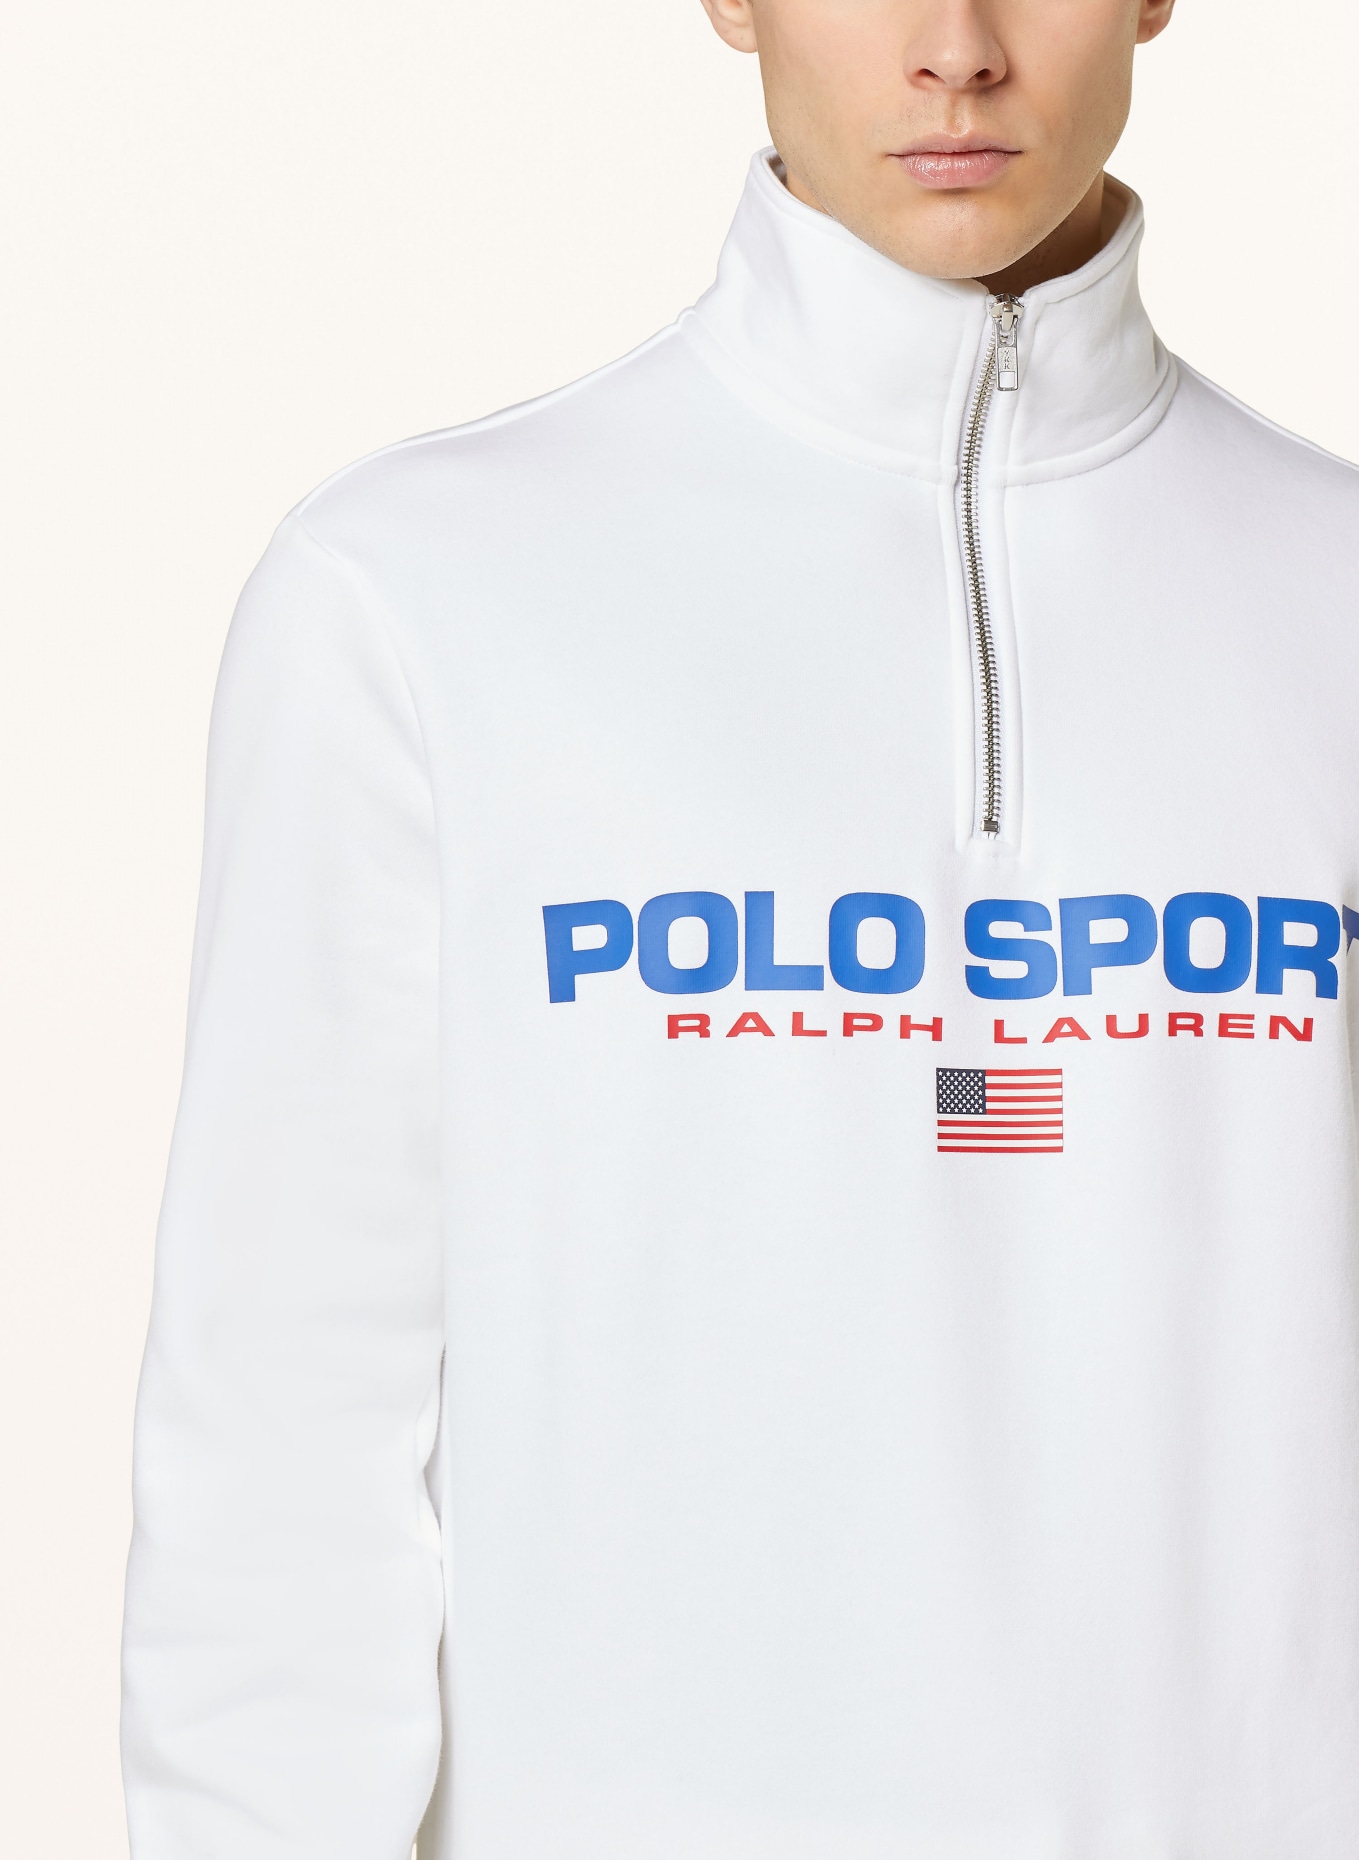 POLO SPORT Sweatshirt fabric half-zip sweater, Color: WHITE/ BLUE/ RED (Image 4)